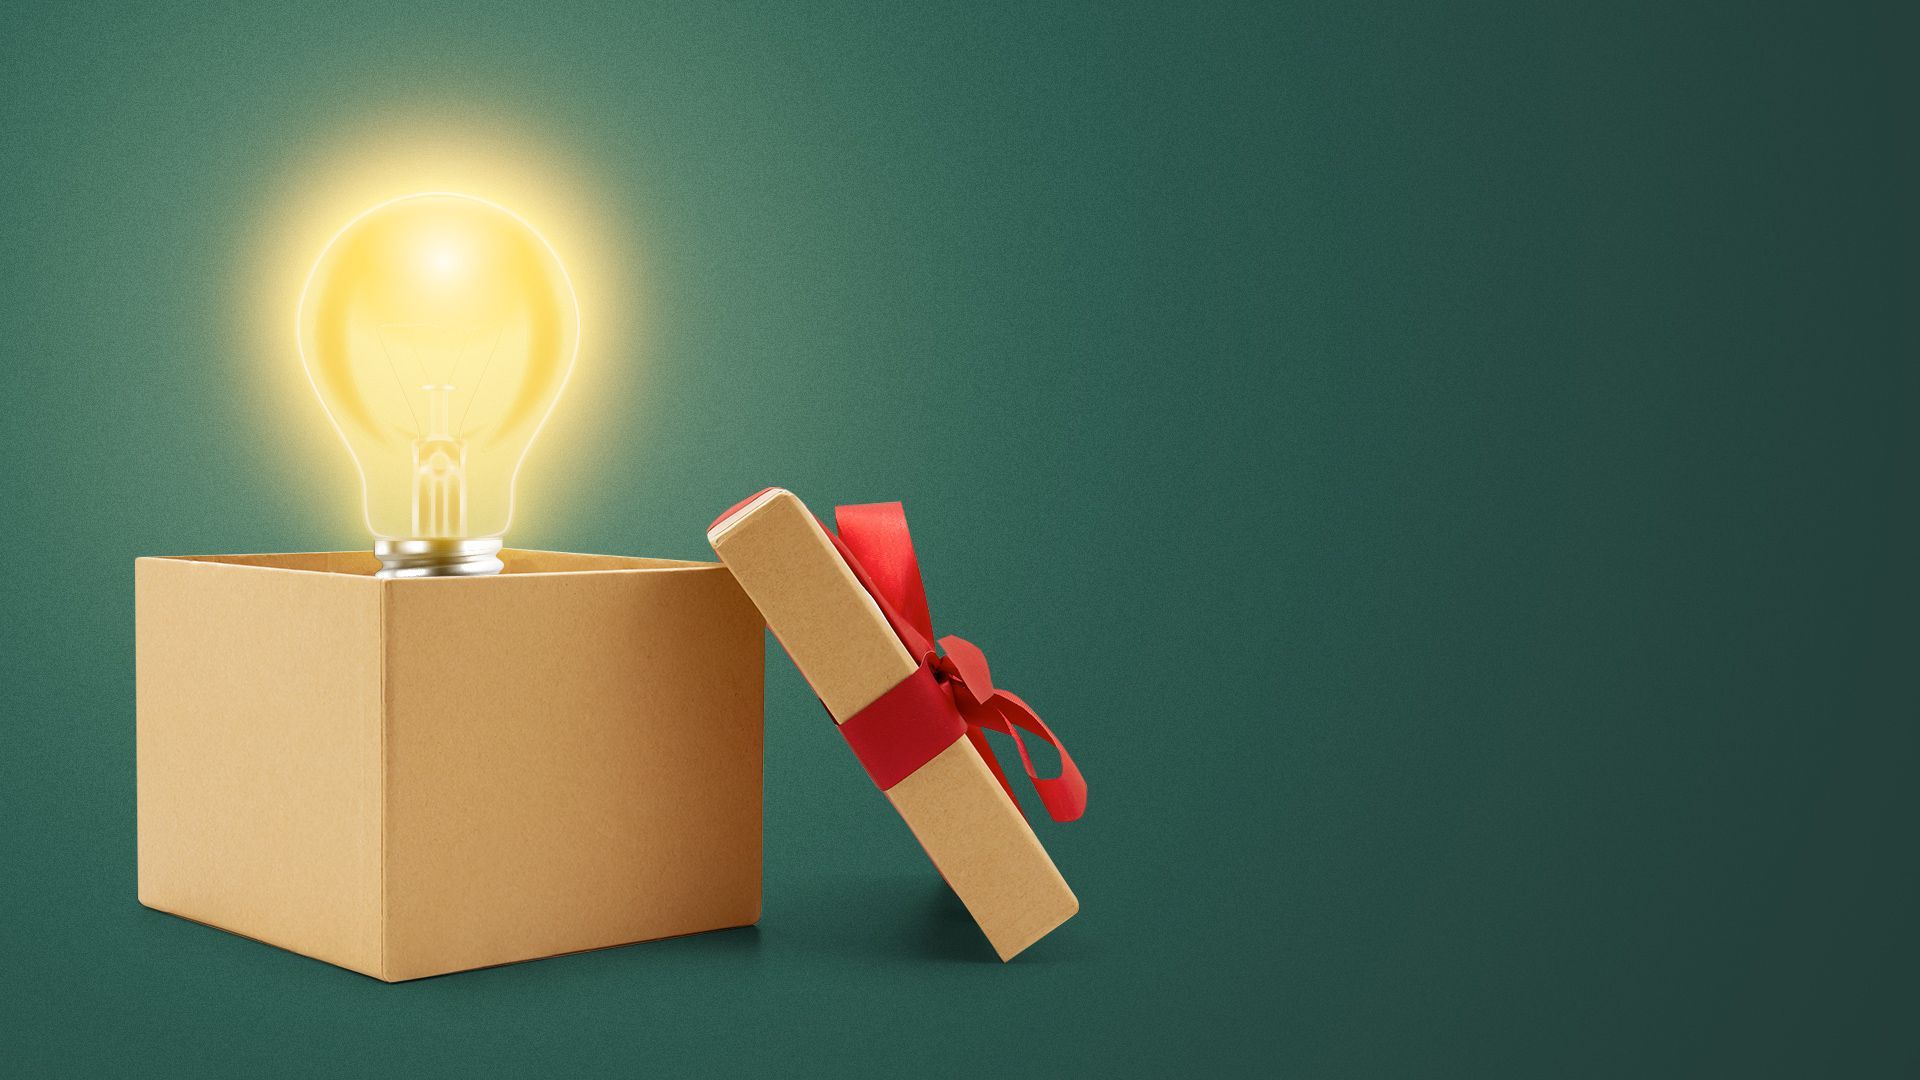 Illustration of an opened gift box with a glowing light bulb inside. 